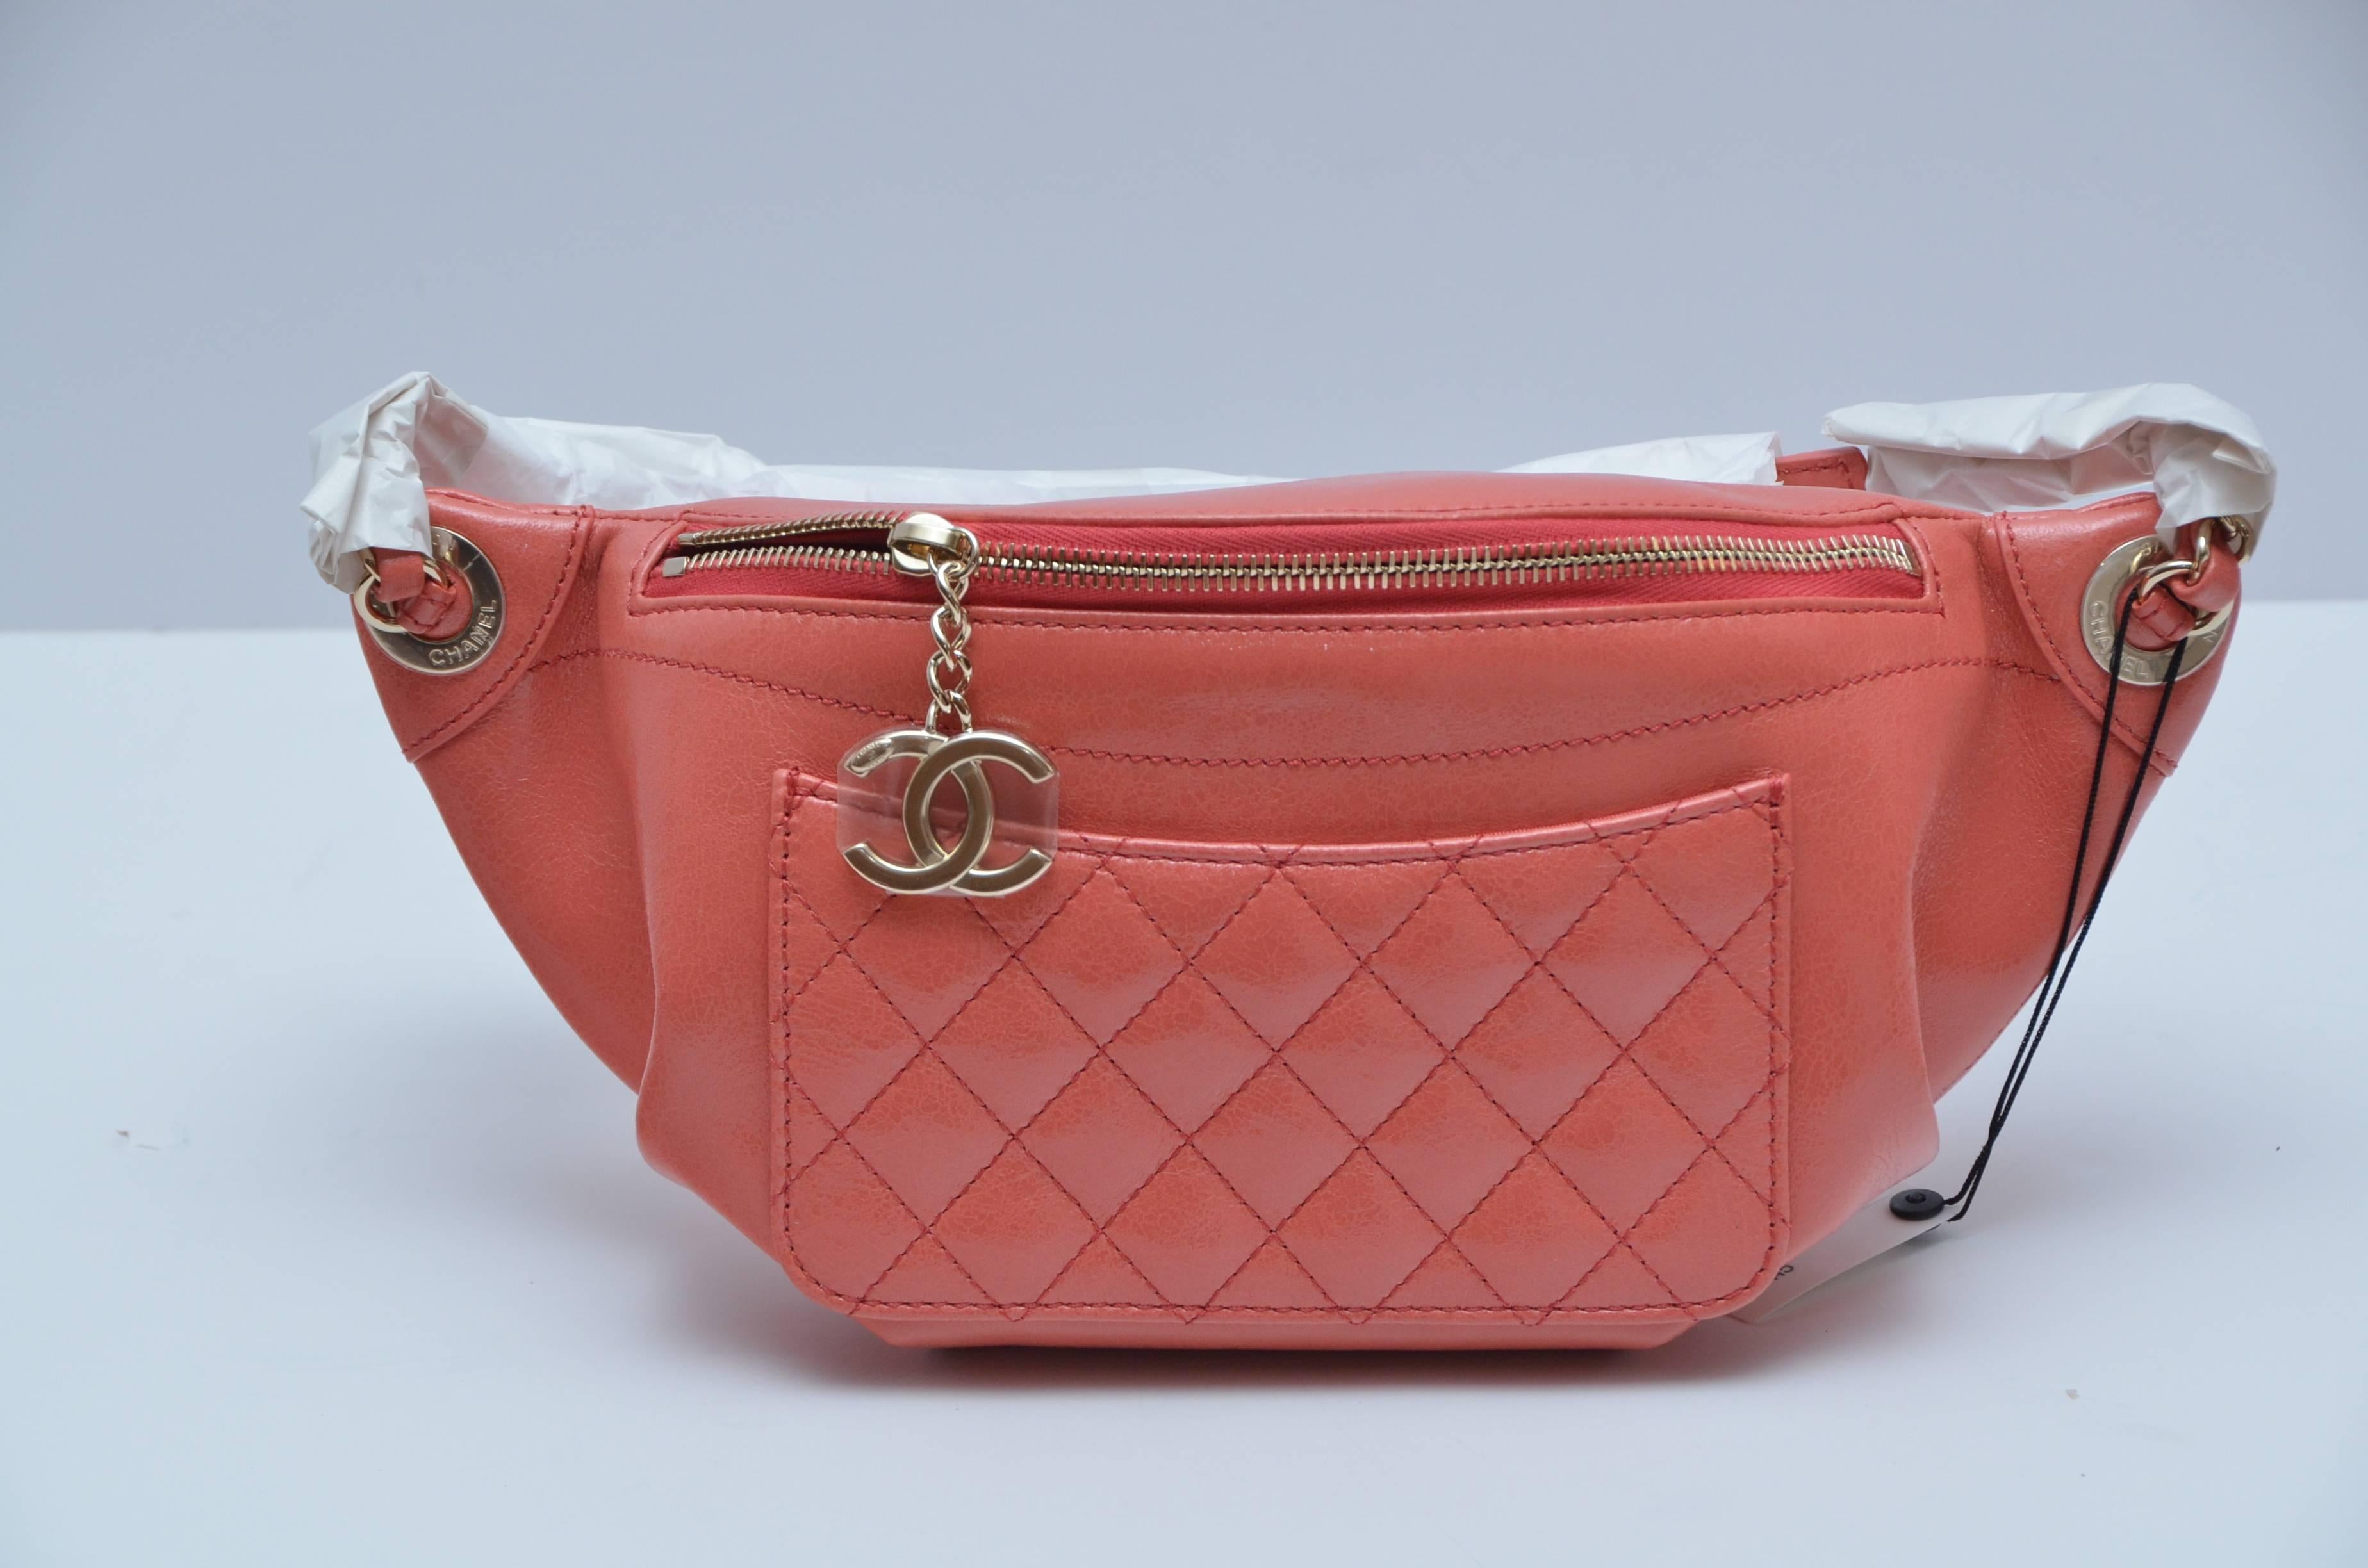 As Seen On Rita Ora 
Very Rare  Limited Edition 
Runway Collector's Item 
Nwt Nib Chanel 2018   
Glossy Pink  Calf Classic Belt Bag With Gold Tone Hardware
This bag has a zip and is extremely roomy
Approximate measurements: 5.5 X 13.4 X 2.8 CM

FULL